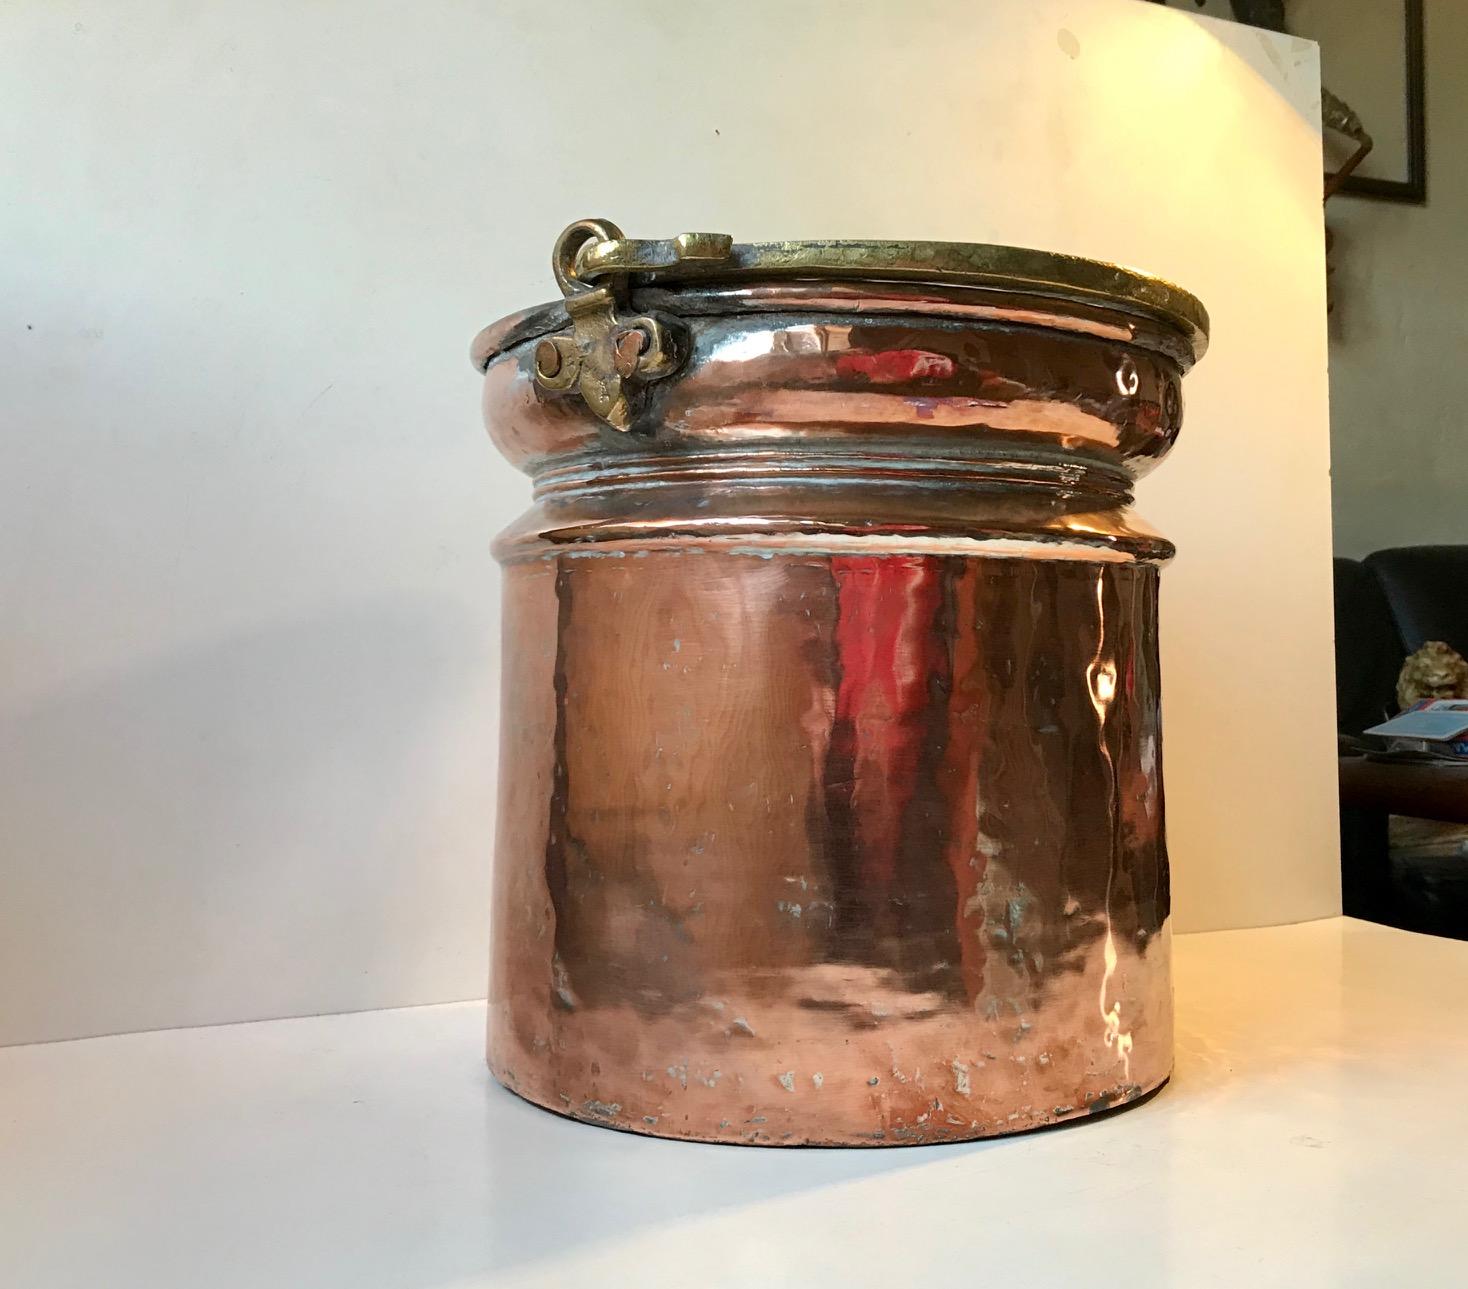 A fine quality Scandinavian (probably Swedish) coal or fireplace bucket. It dates to circa 1750. Perhaps a tat earlier. Finely hand forged brass handle, rivets, inner pewter lining and a honest ware with a rosy silvery patina. The height of 26.5 cm